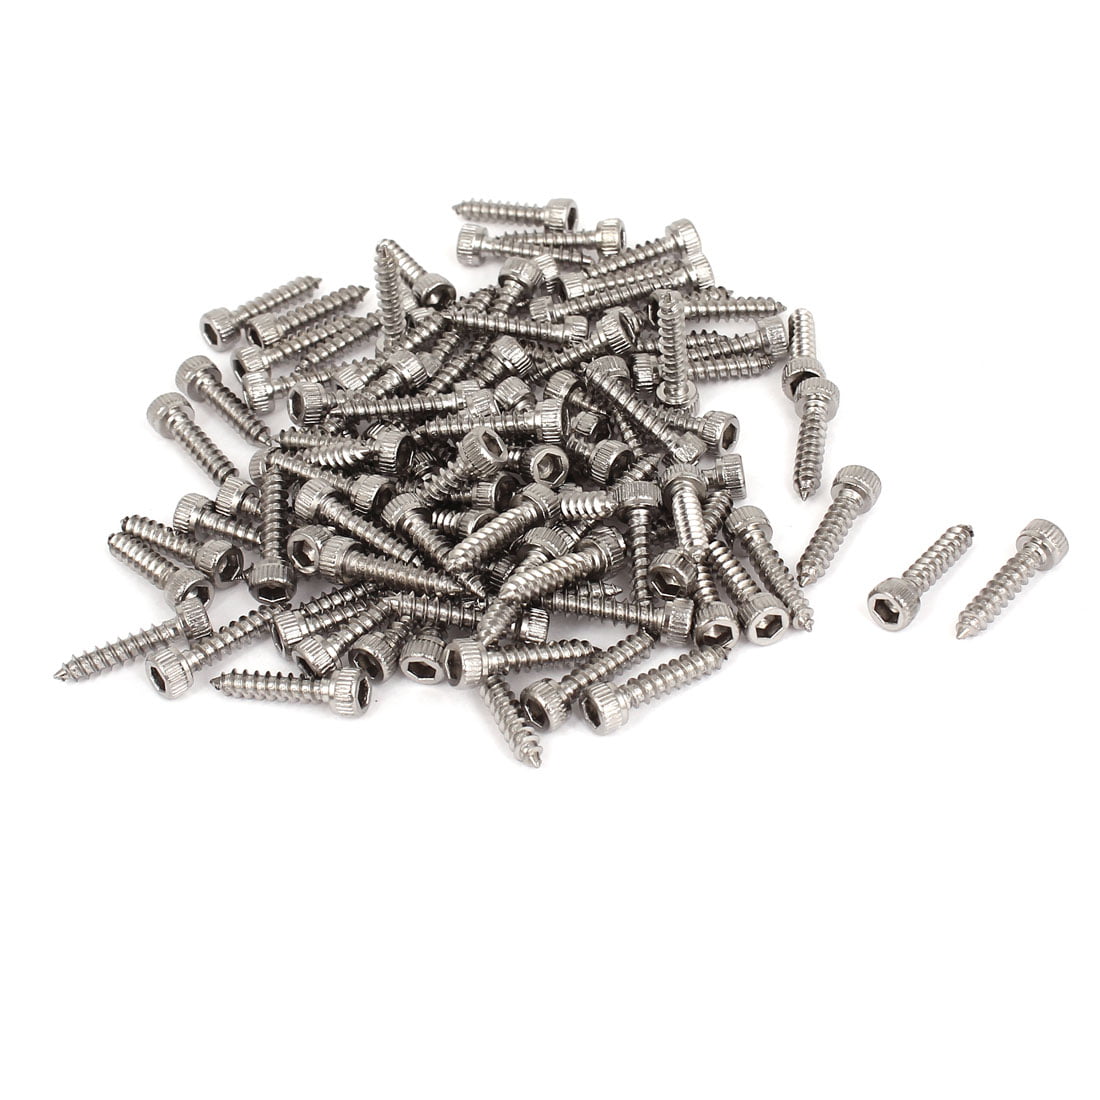 M3 x 14mm M3 100Pcs Tapping Screws Stainless Steel Hex Socket Cap Head Self-Tapping Screw